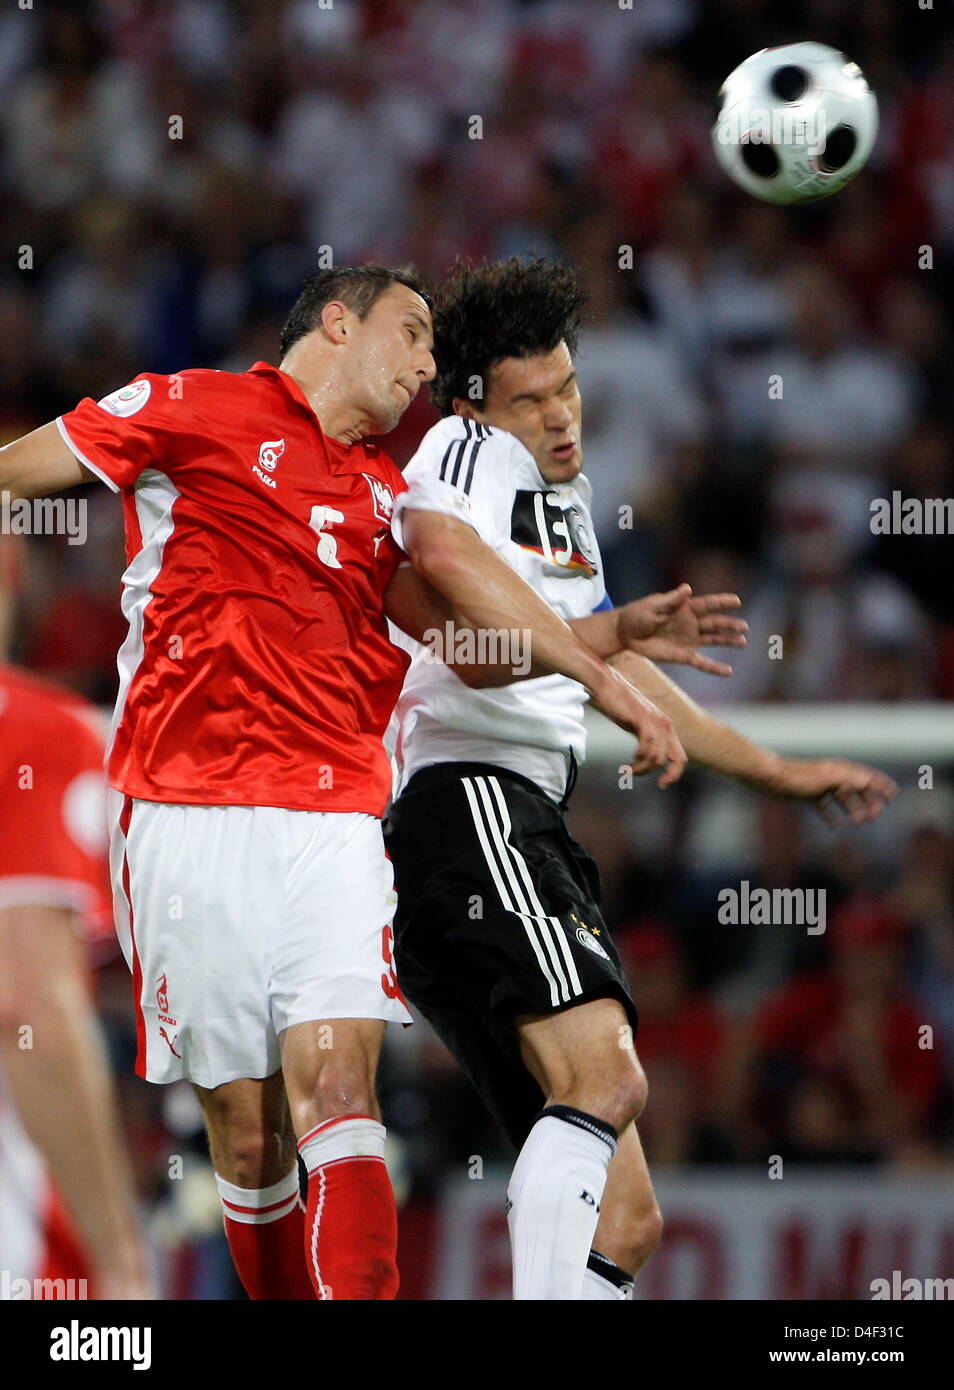 Miachel Ballack (r) of Germany vies with Dariusz Dudka of Poland during the EURO 2008 preliminary round group B match in Woerthersee Stadium, Klagenfurt, Austria, 08 June 2008. Photo: Oliver Berg dpa +please note UEFA restrictions particularly in regard to slide shows and 'No Mobile Services'+ +++(c) dpa - Bildfunk+++ Stock Photo